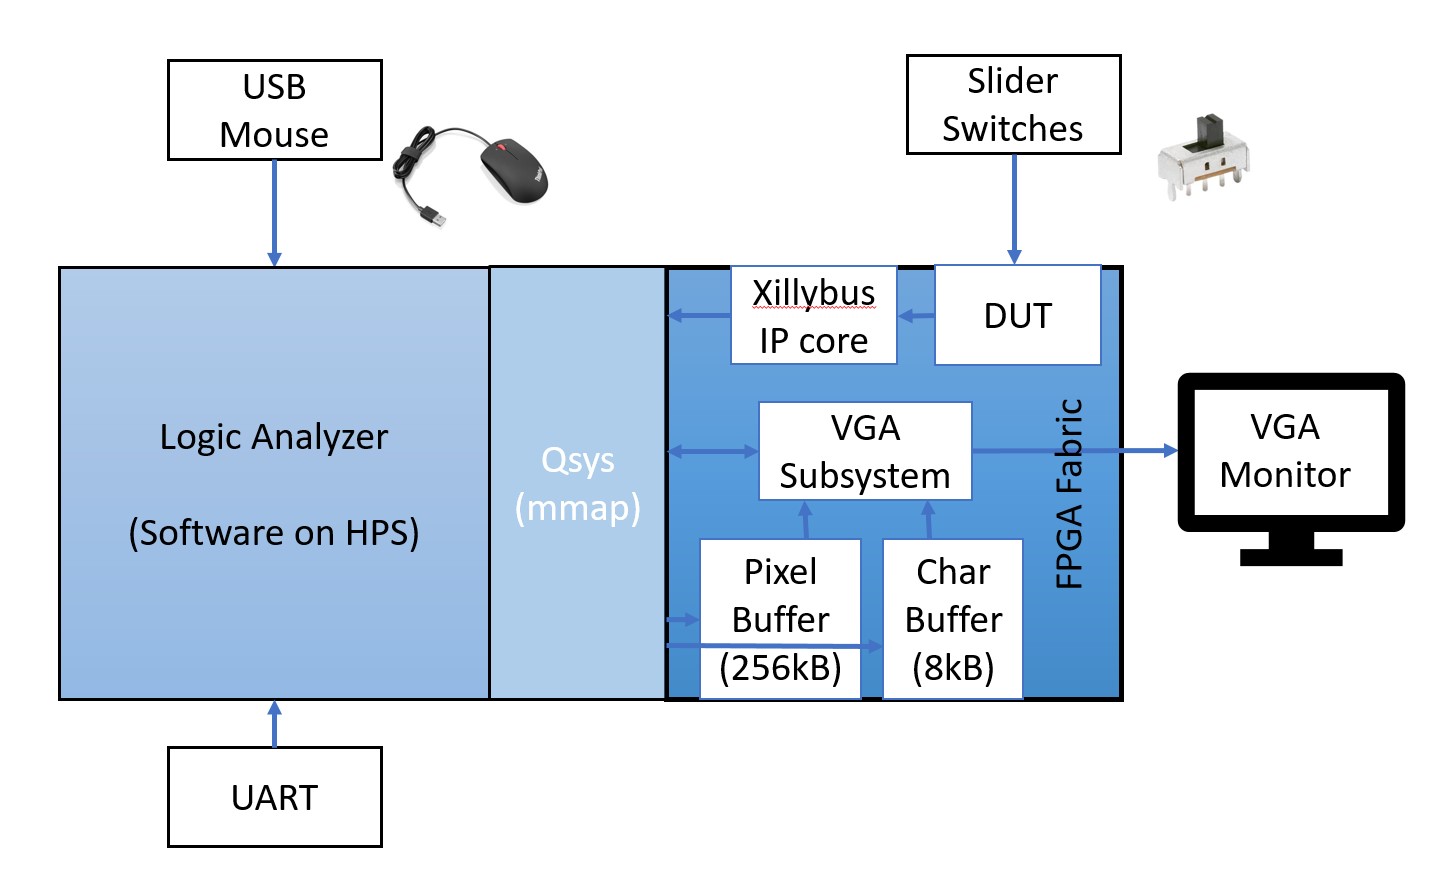 Figure 3 shows detailed block diagram of the system